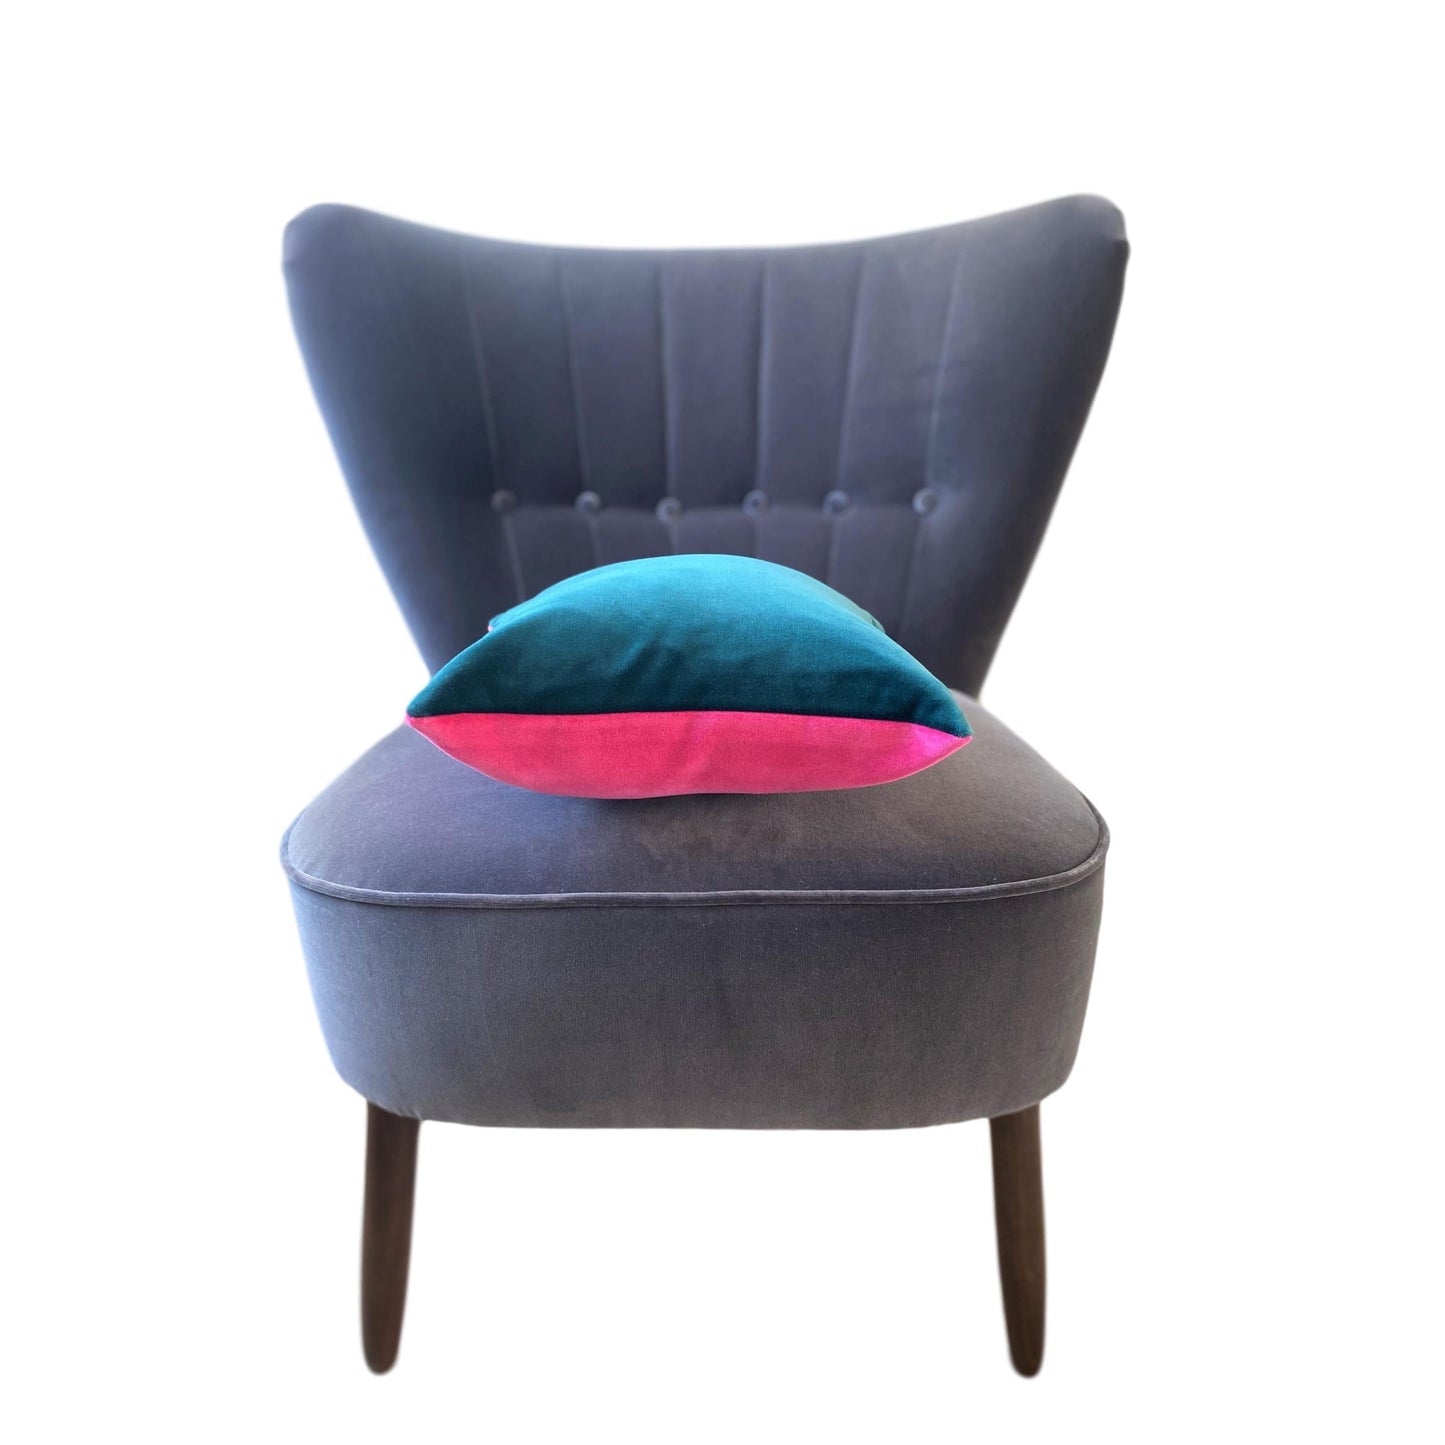 teal pillow with bright pink by Luxe 39